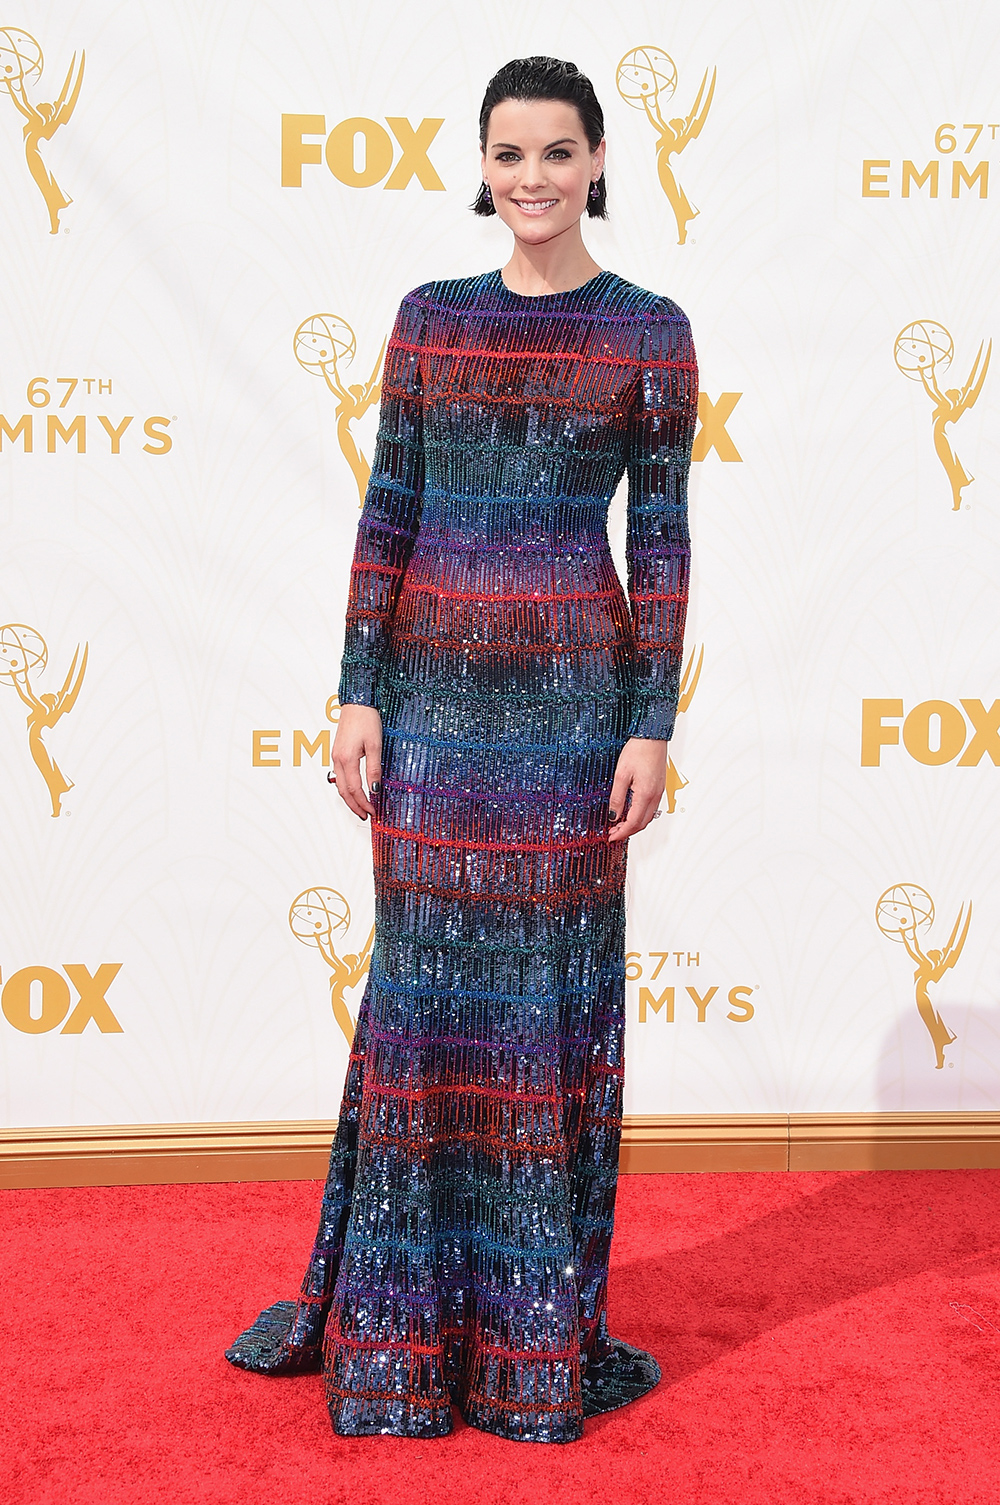 Jaimie Alexander wears Armani Prive to the 67th Annual Primetime Emmy Awards. Photo / Getty Images